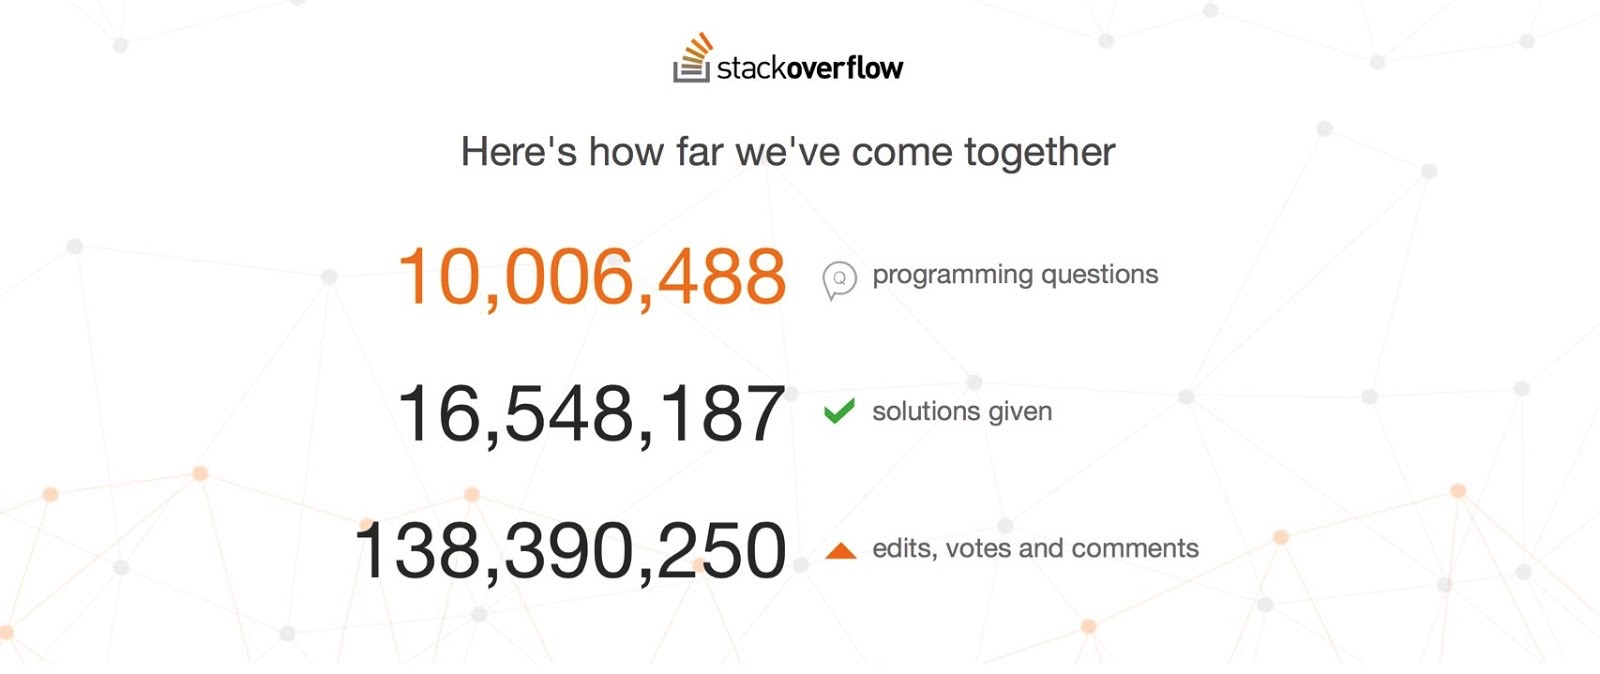 stack overflow has answered 10 million questions